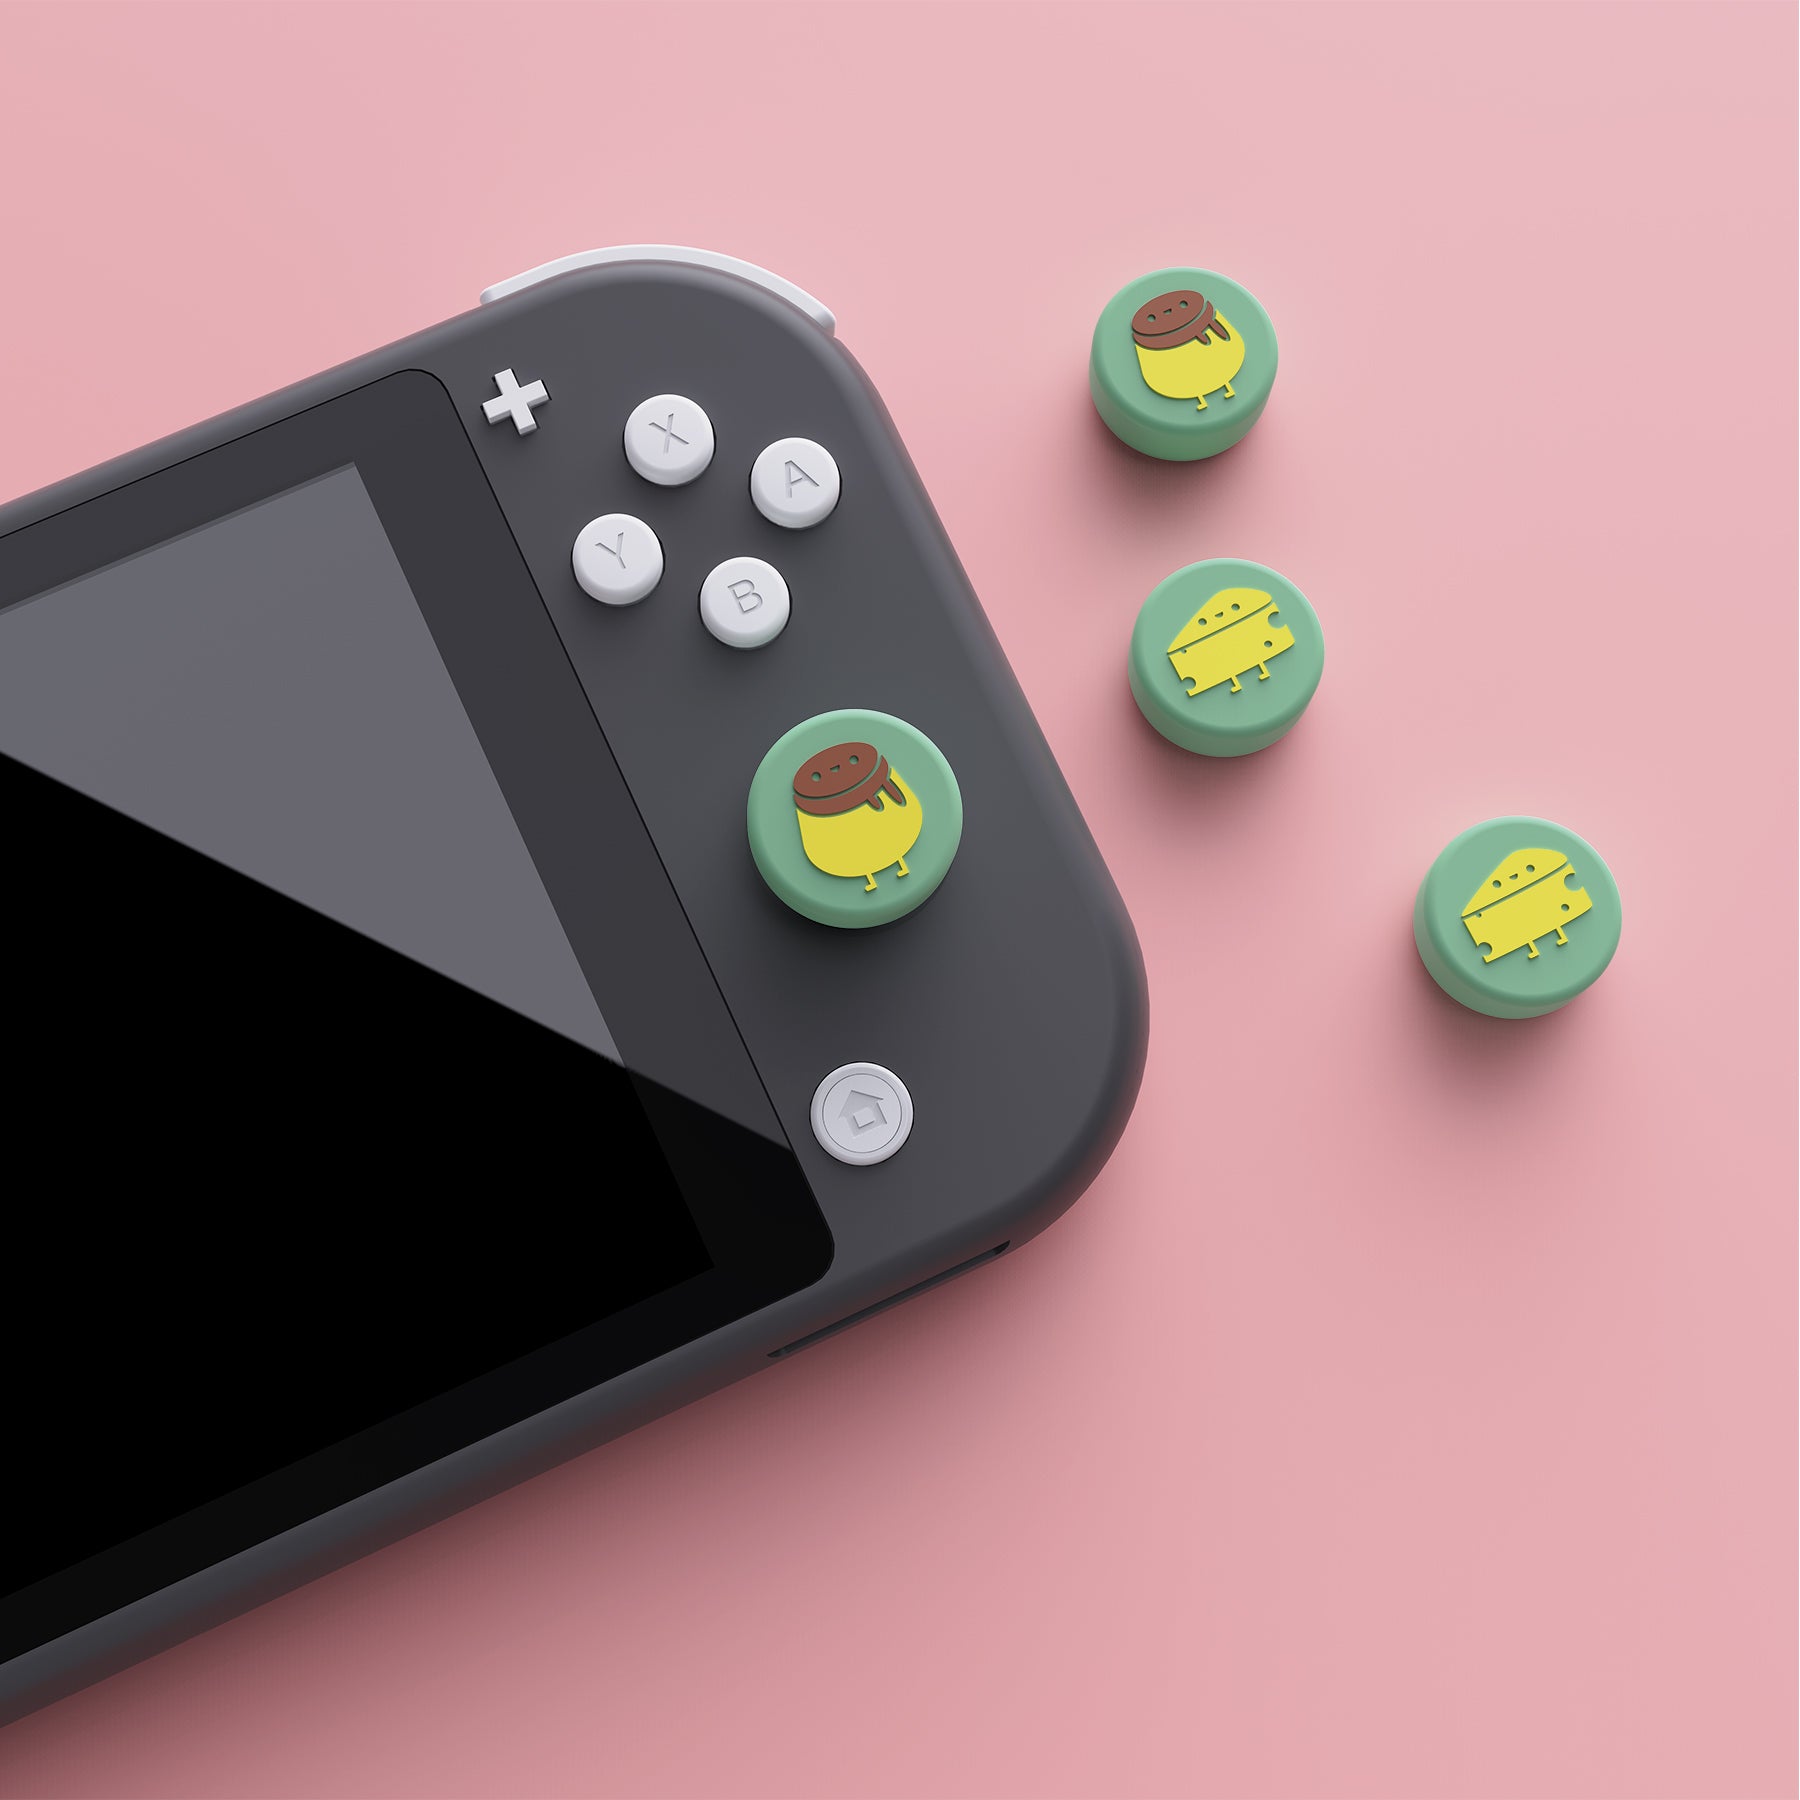 PlayVital Cheese & Pudding Cute Switch Thumb Grip Caps, Joystick Caps for Nintendo Switch Lite, Silicone Analog Cover Thumbstick Grips for Switch OLED Joycon - Seafoam Green - NJM1097 playvital